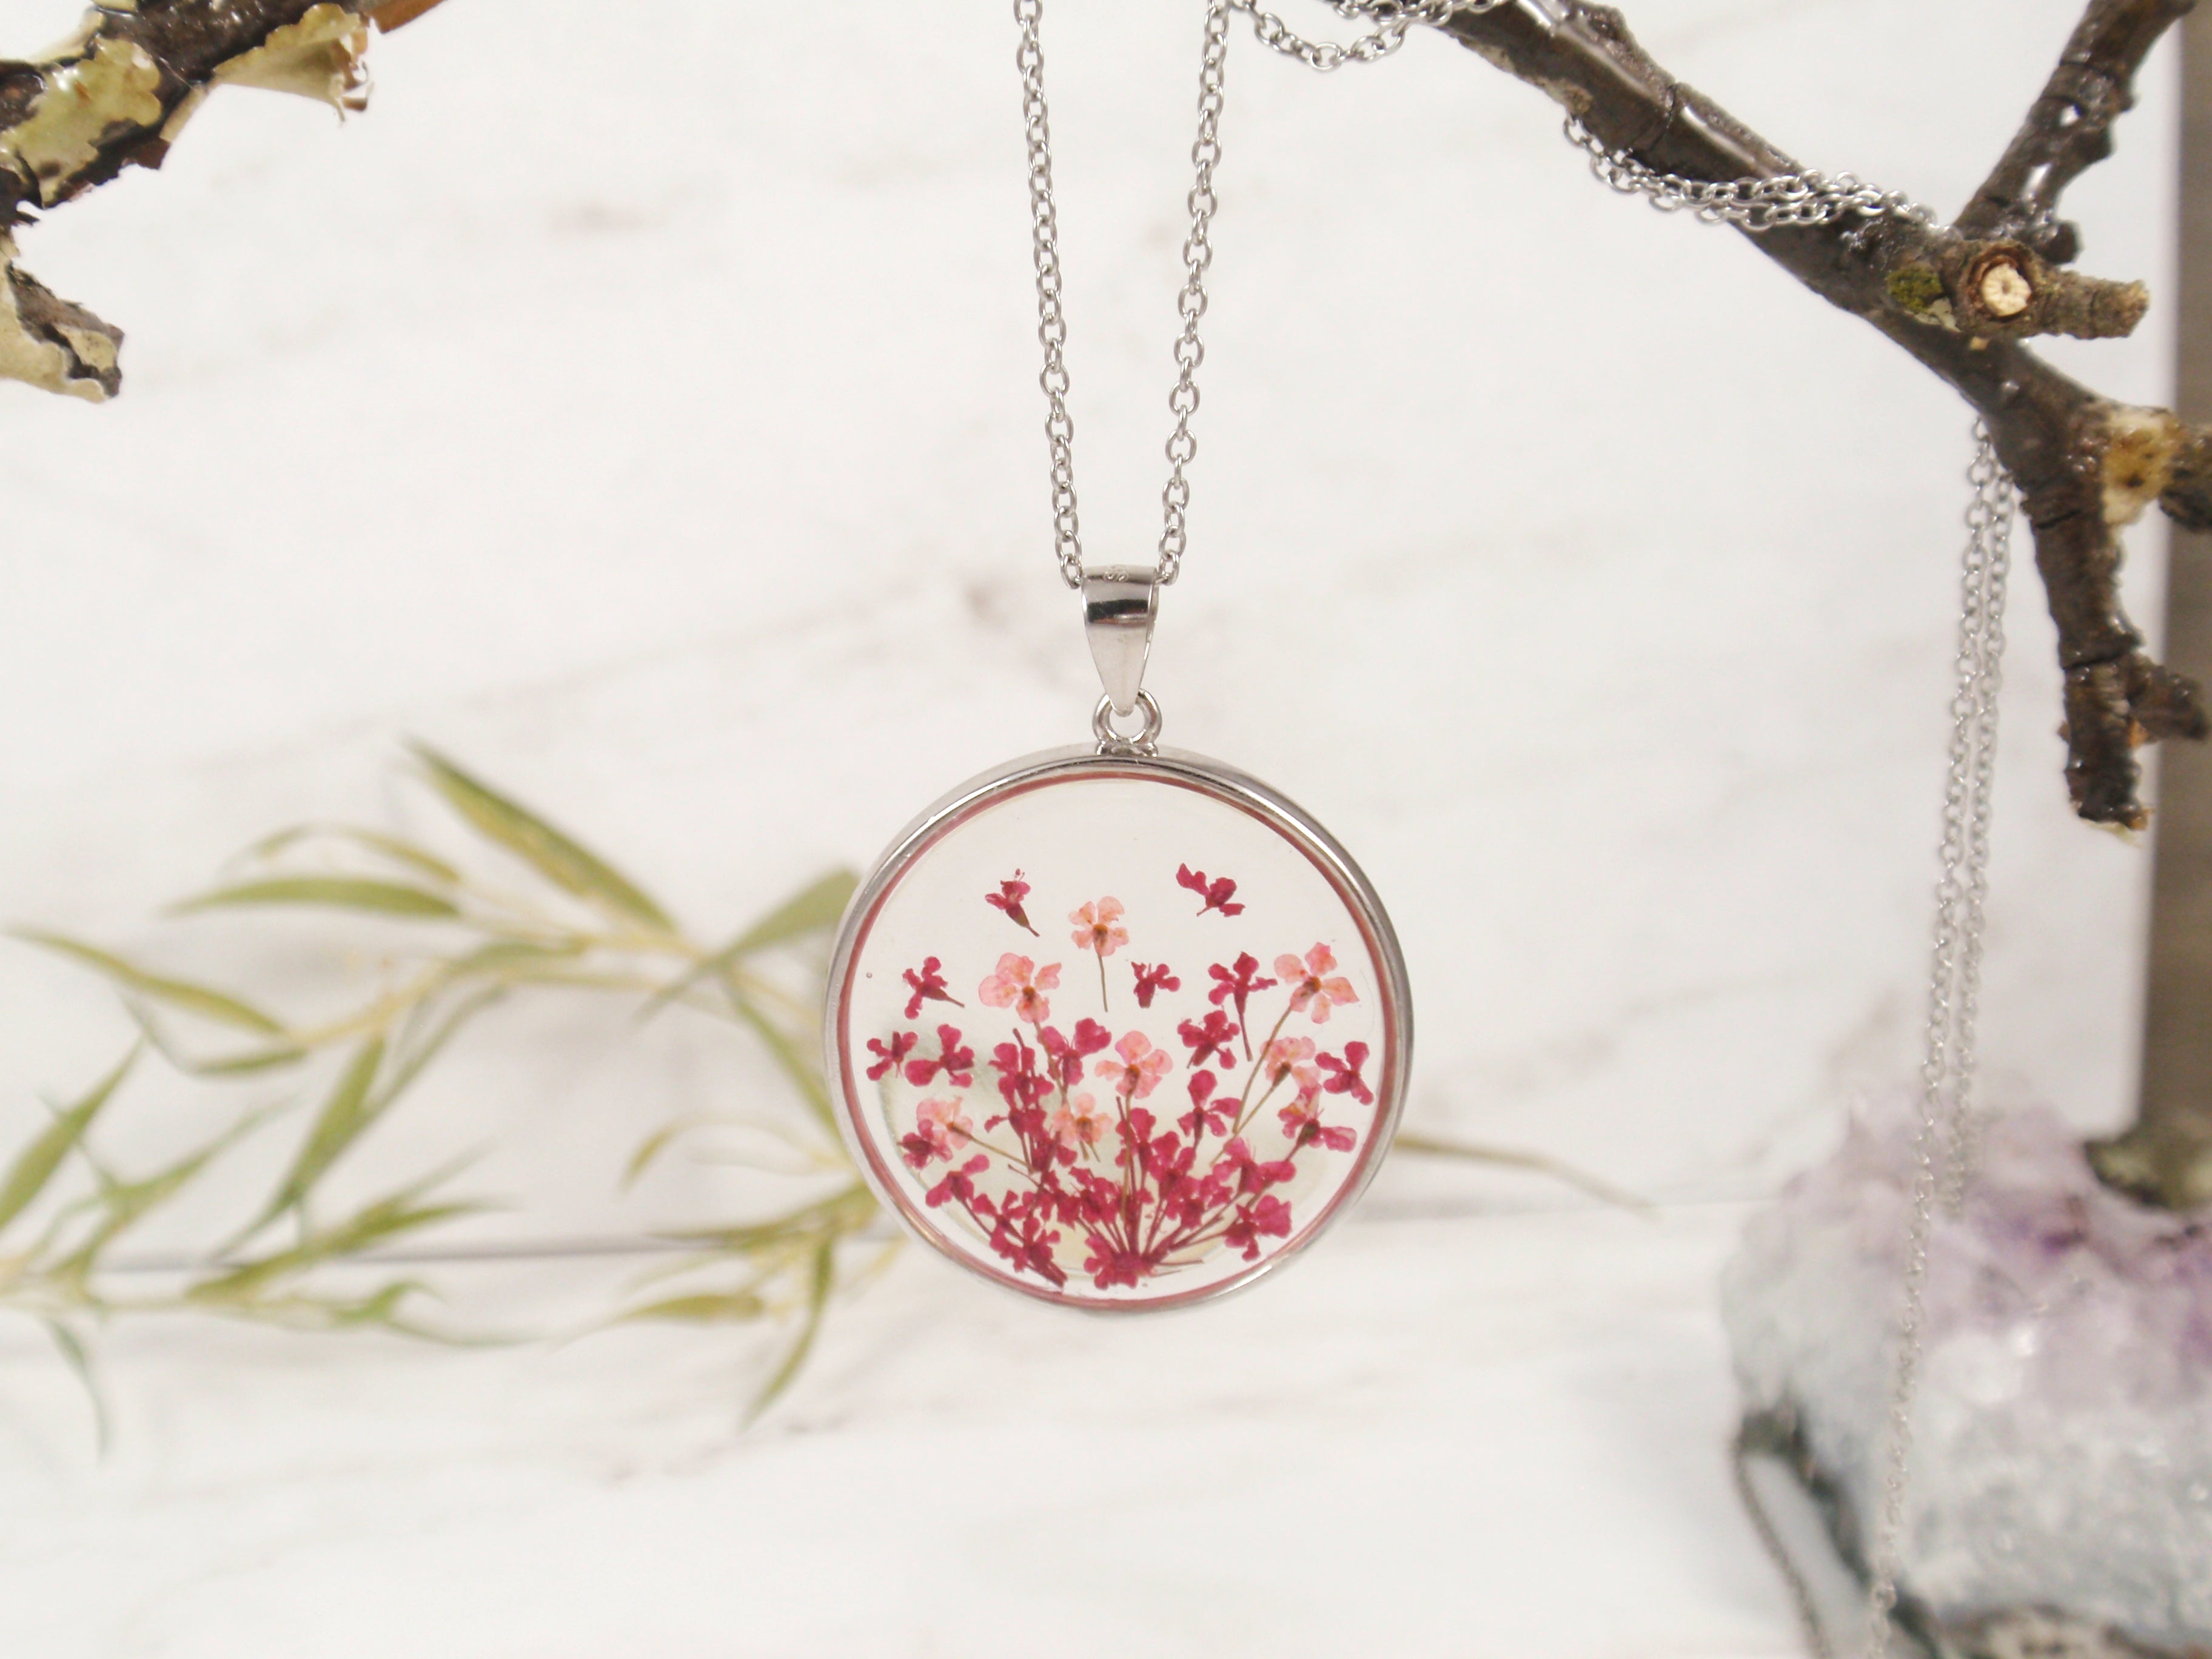 Personalized Girls Women Real Flower Resin Pendant Necklace Initial Jewelry  Pressed Flower Necklace Handmade Jewelry Mother's Day Gift - Etsy